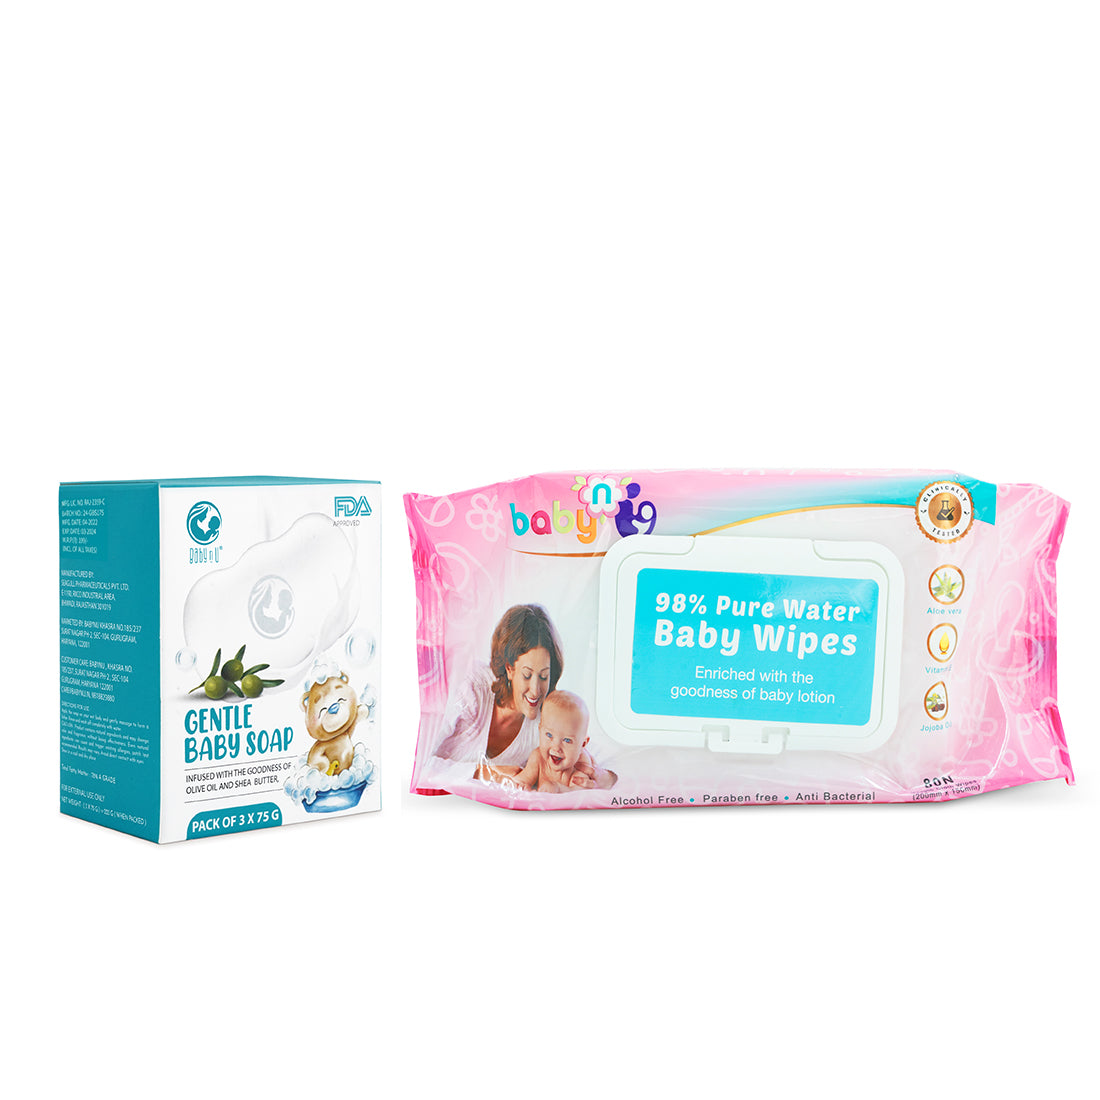 Moisturizing Soap Bar and 98% Pure Water Baby Wipes Combo